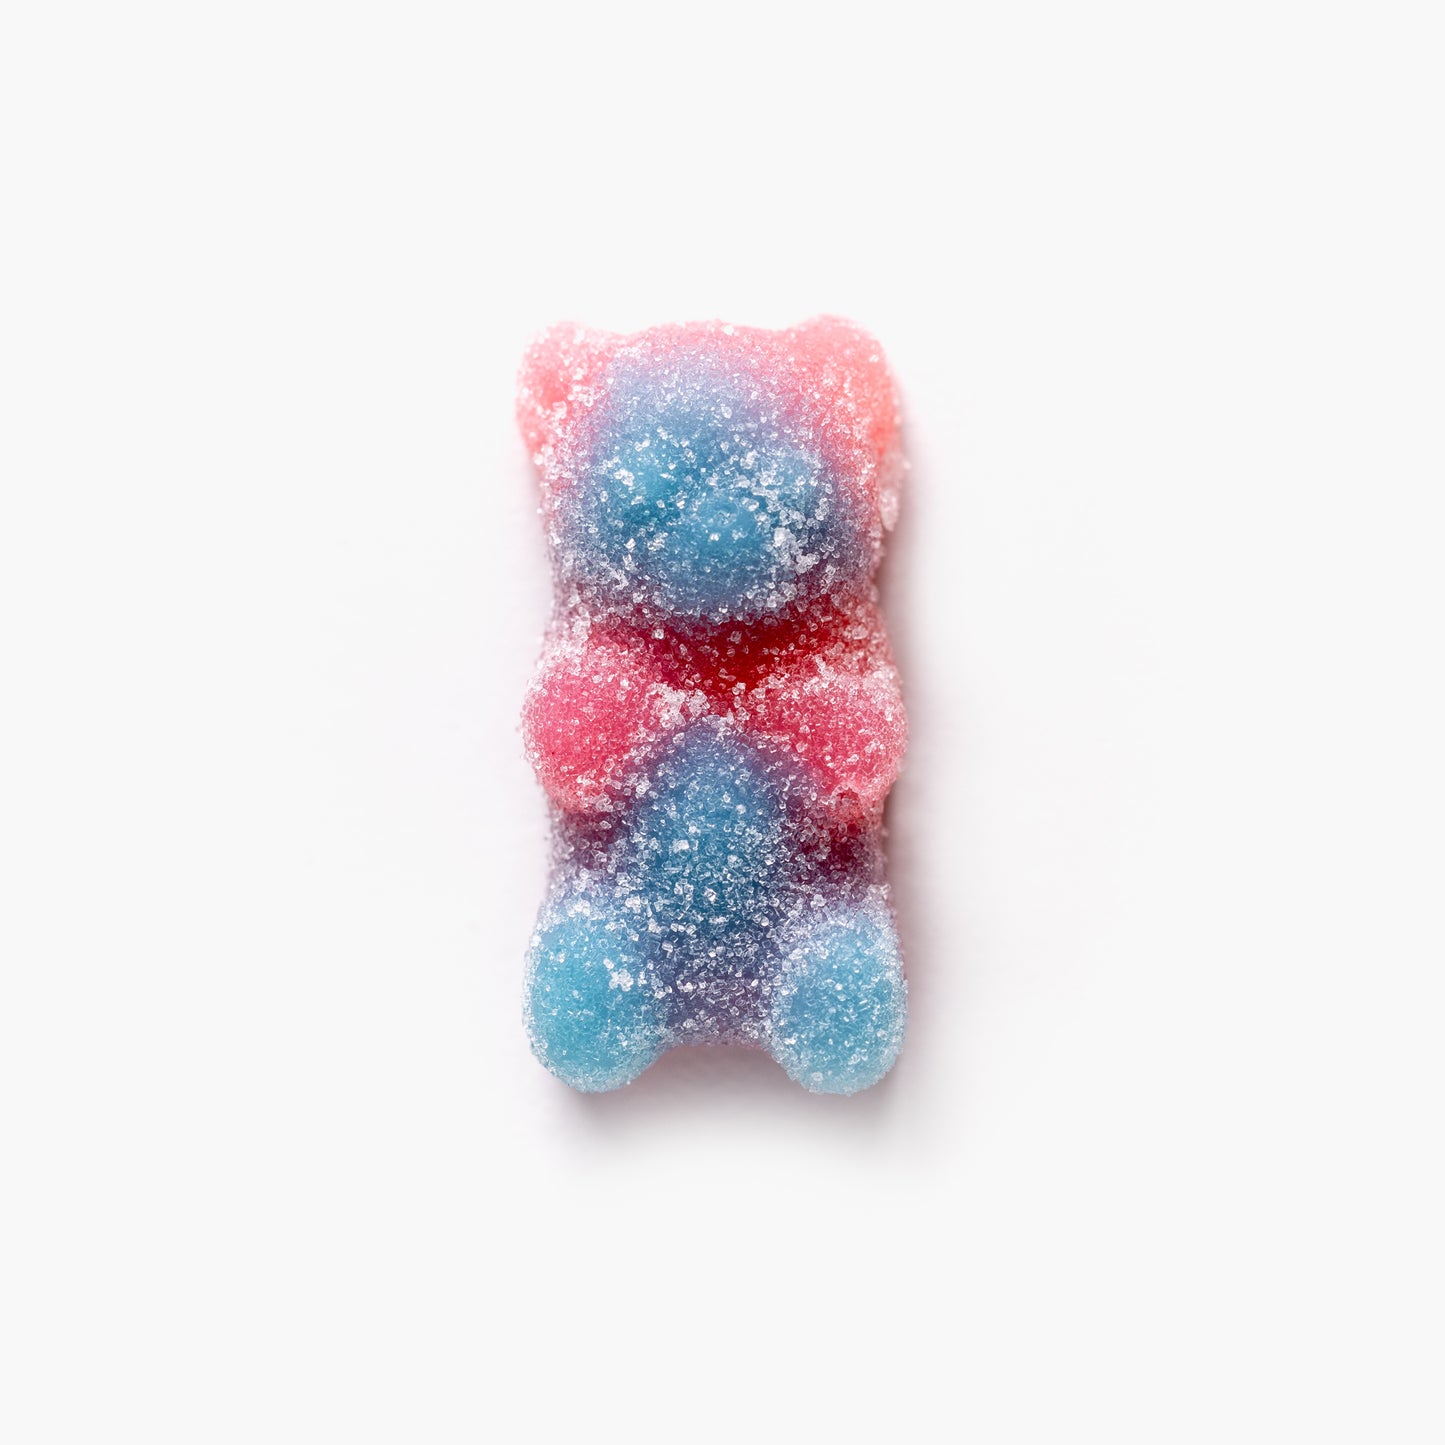 COTTON CANDY HYPE GUMMY BEARS